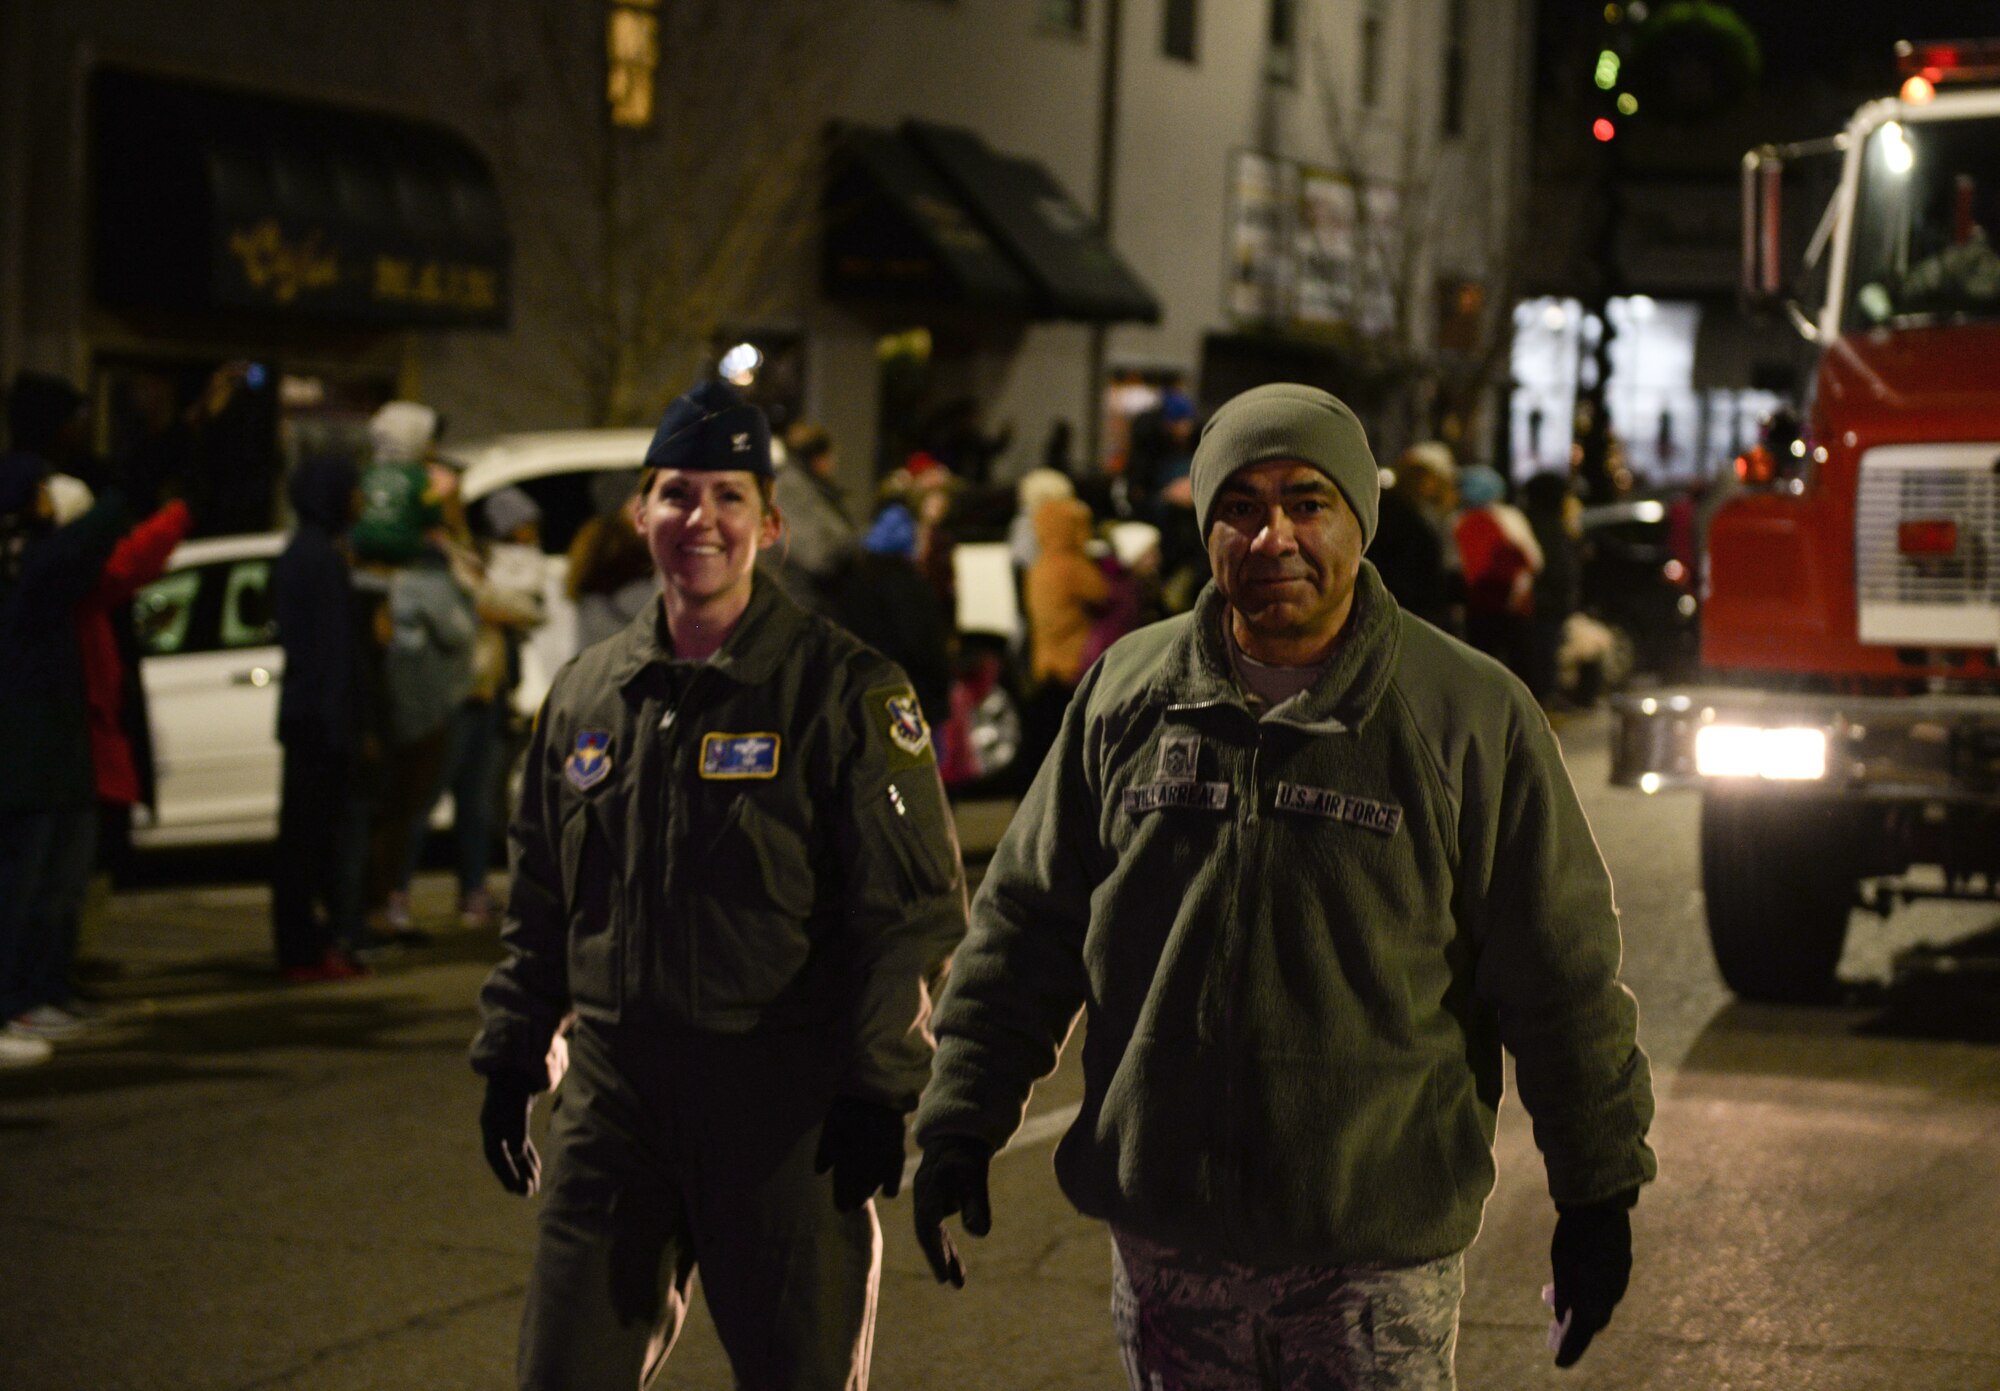 Col. Samantha Weeks, 14th Flying Training Wing commander, and Chief Master Sgt. Raul Villarreal Jr., 14th FTW command chief, walk in the Columbus Christmas Parade on Dec. 2, 2019, in Columbus, Miss. Members of the Columbus AFB Fire Department drove one of their trucks in the parade and were led by Weeks and Villarreal. (U.S. Air Force photo by Airman Davis Donaldson)